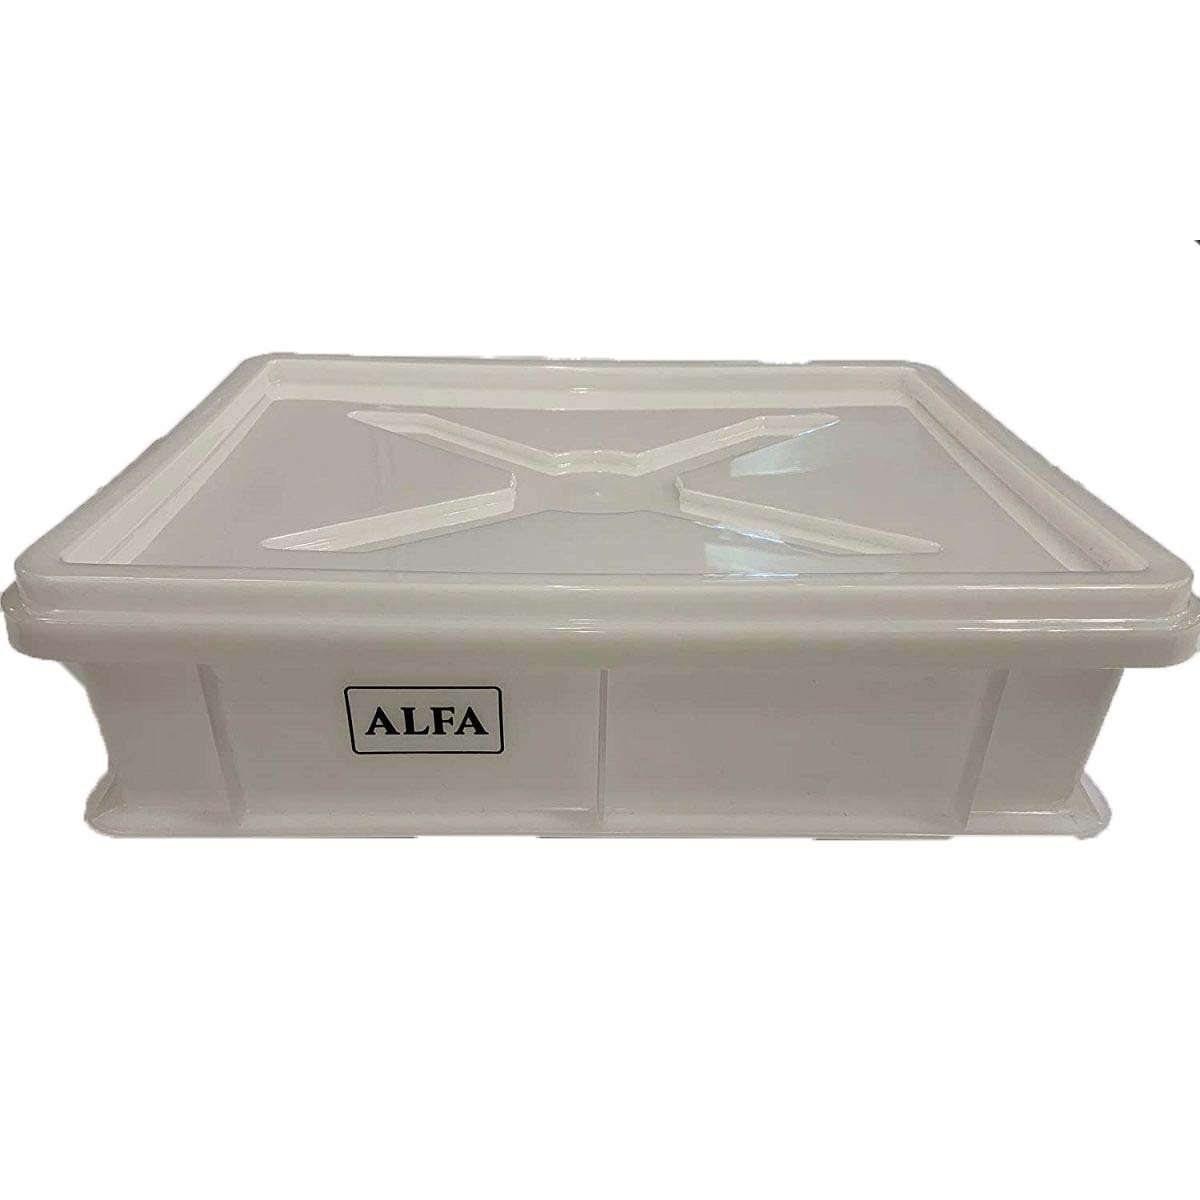 Alfa Proofing Box With Lid- AC-BOX